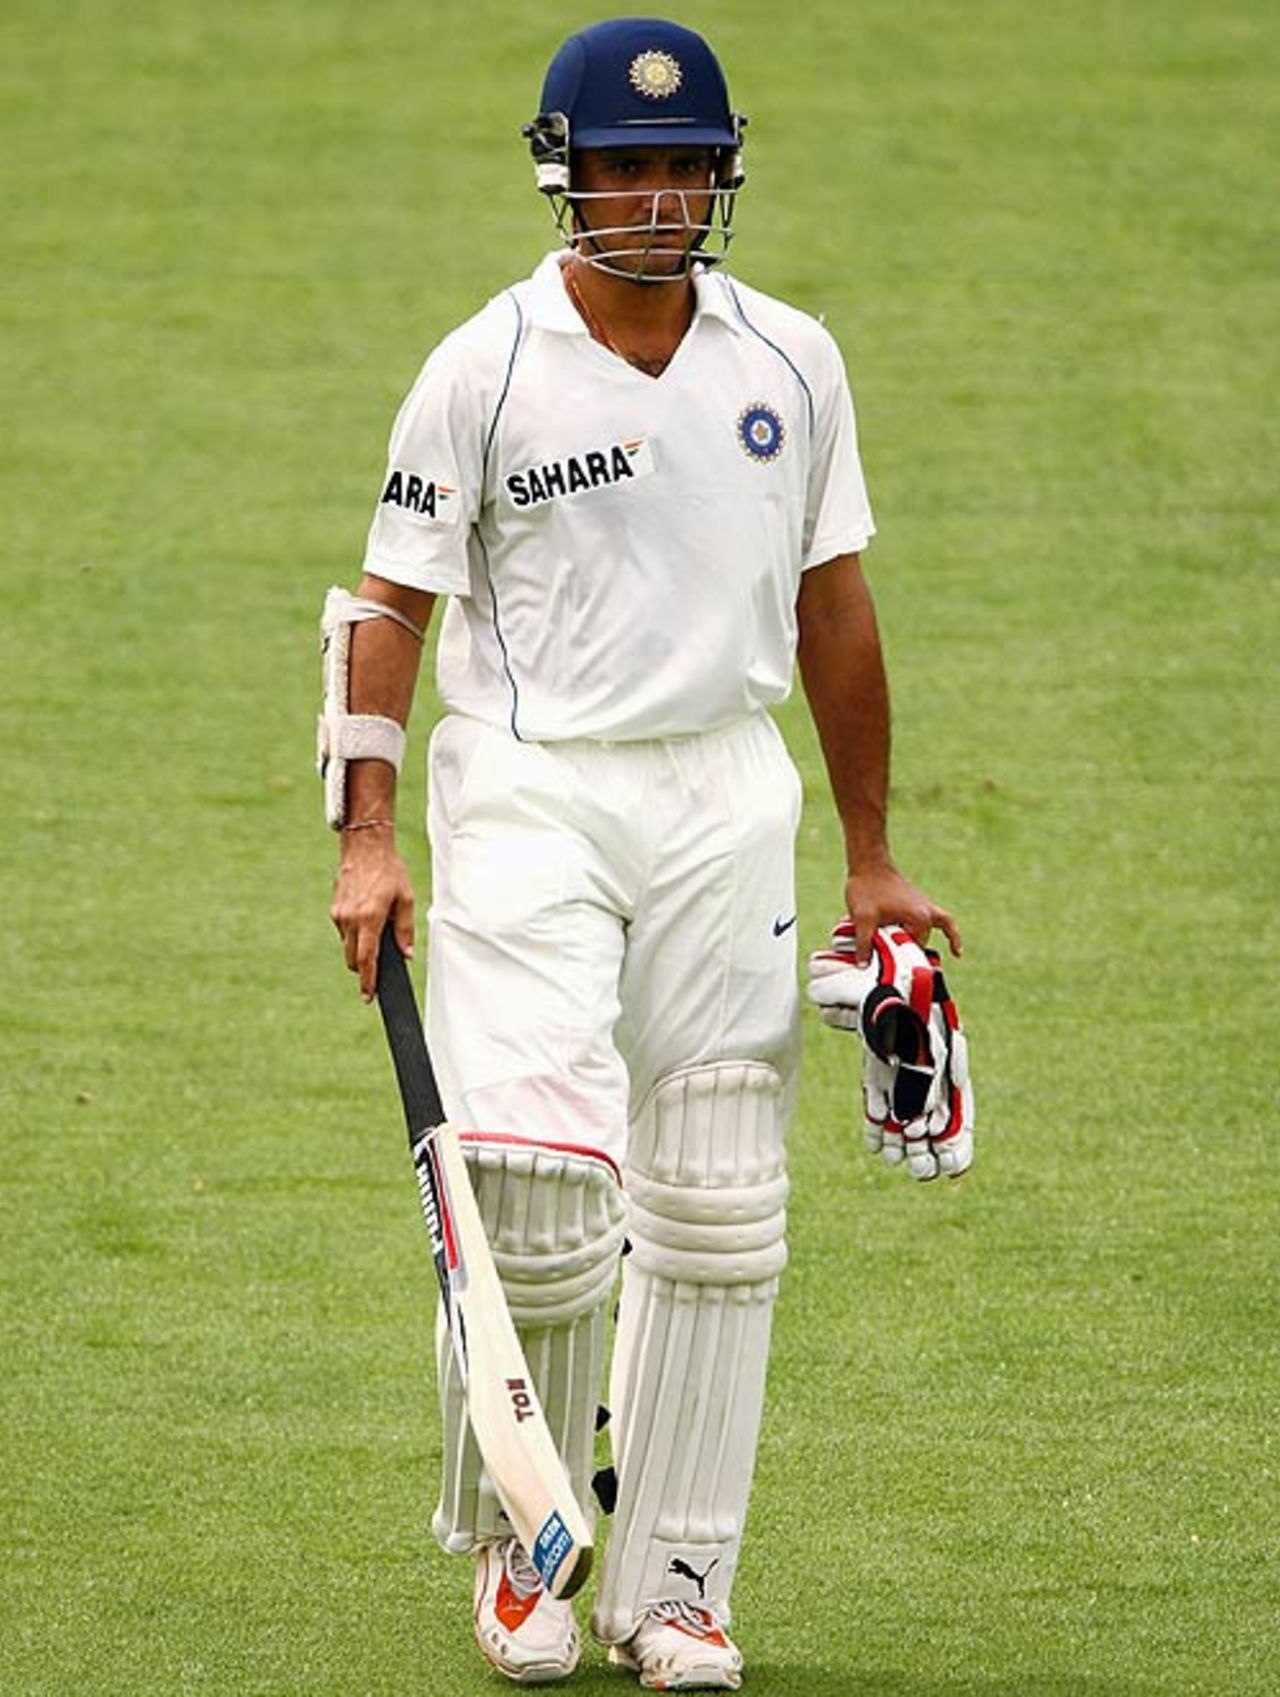 Sourav Ganguly walks back for 59 after flicking one to midwicket, Victoria v Indians, tour match, Melbourne, 2nd day, December 21, 2007